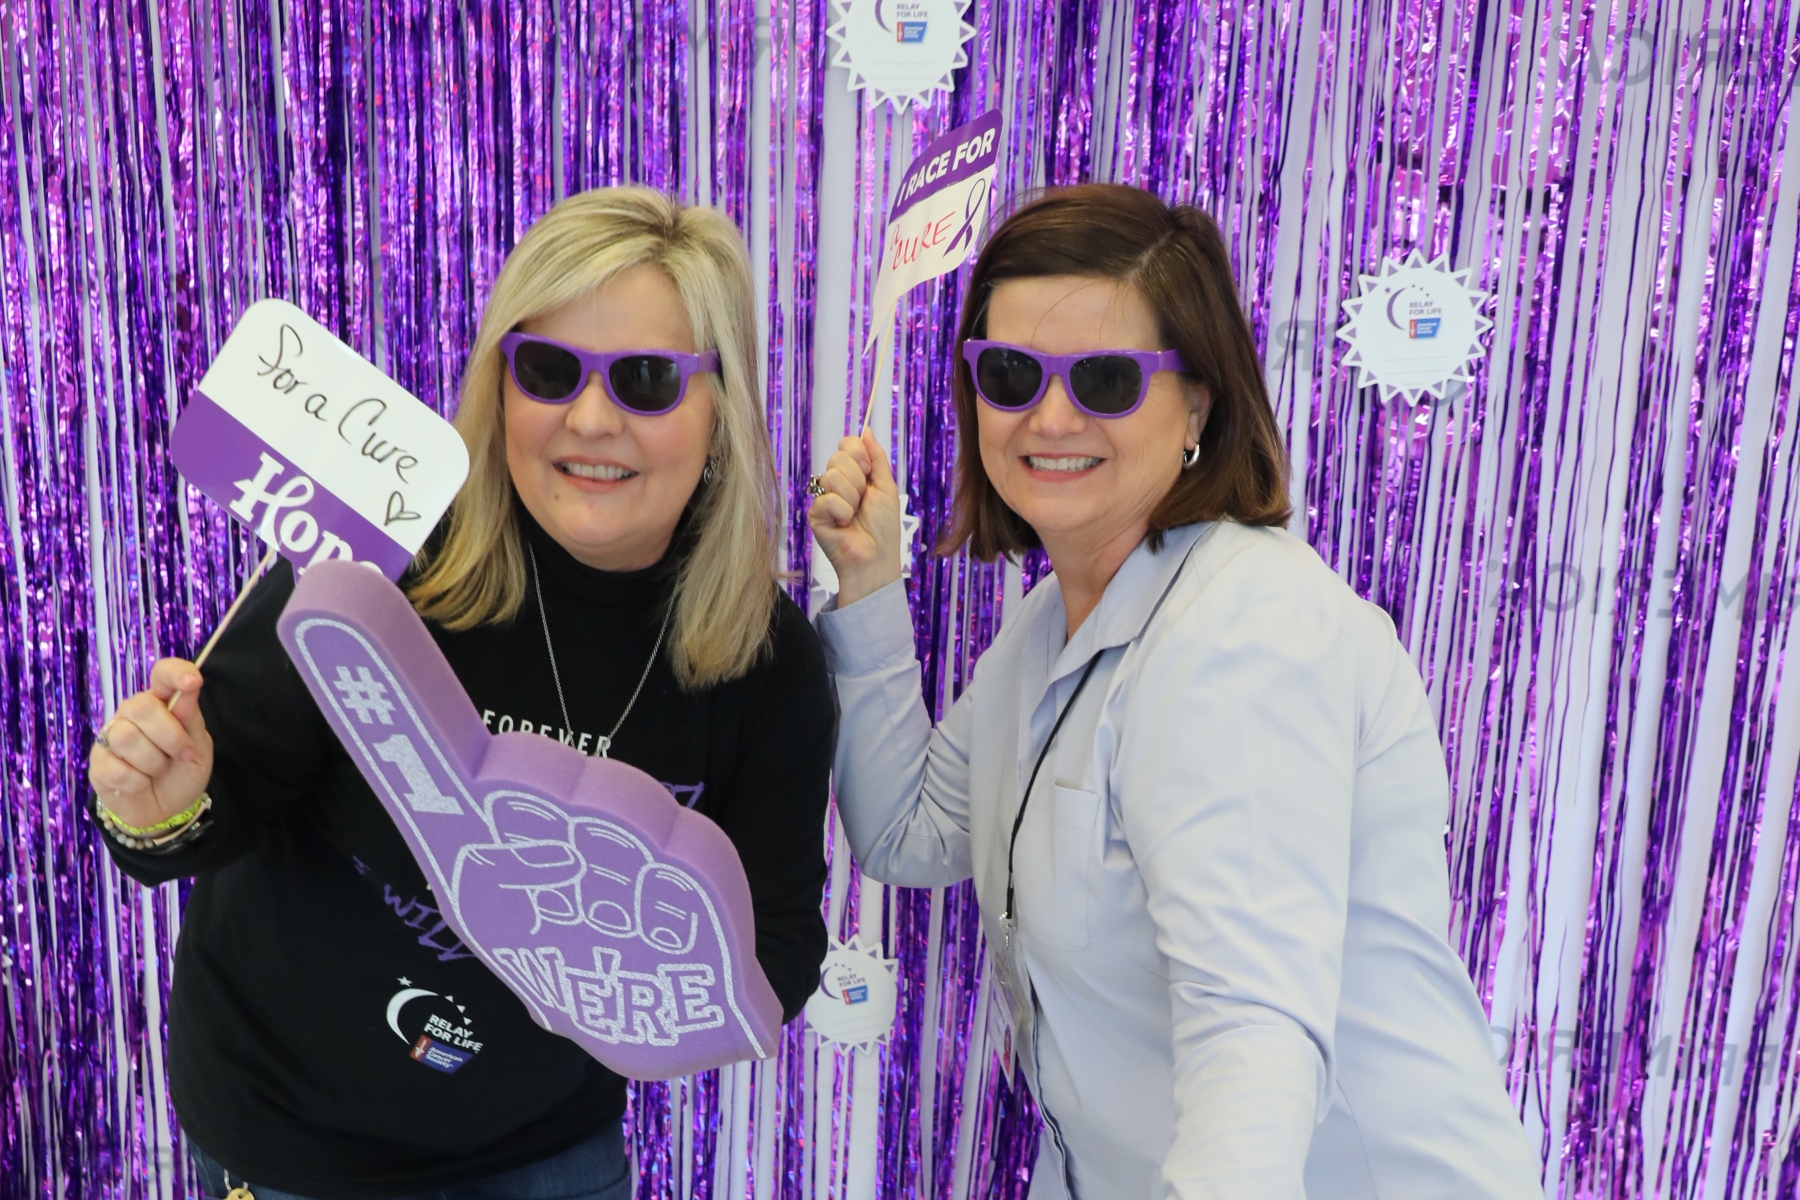 Two female Primerica employees with festive gear posing in front of Relay for Life backdrop